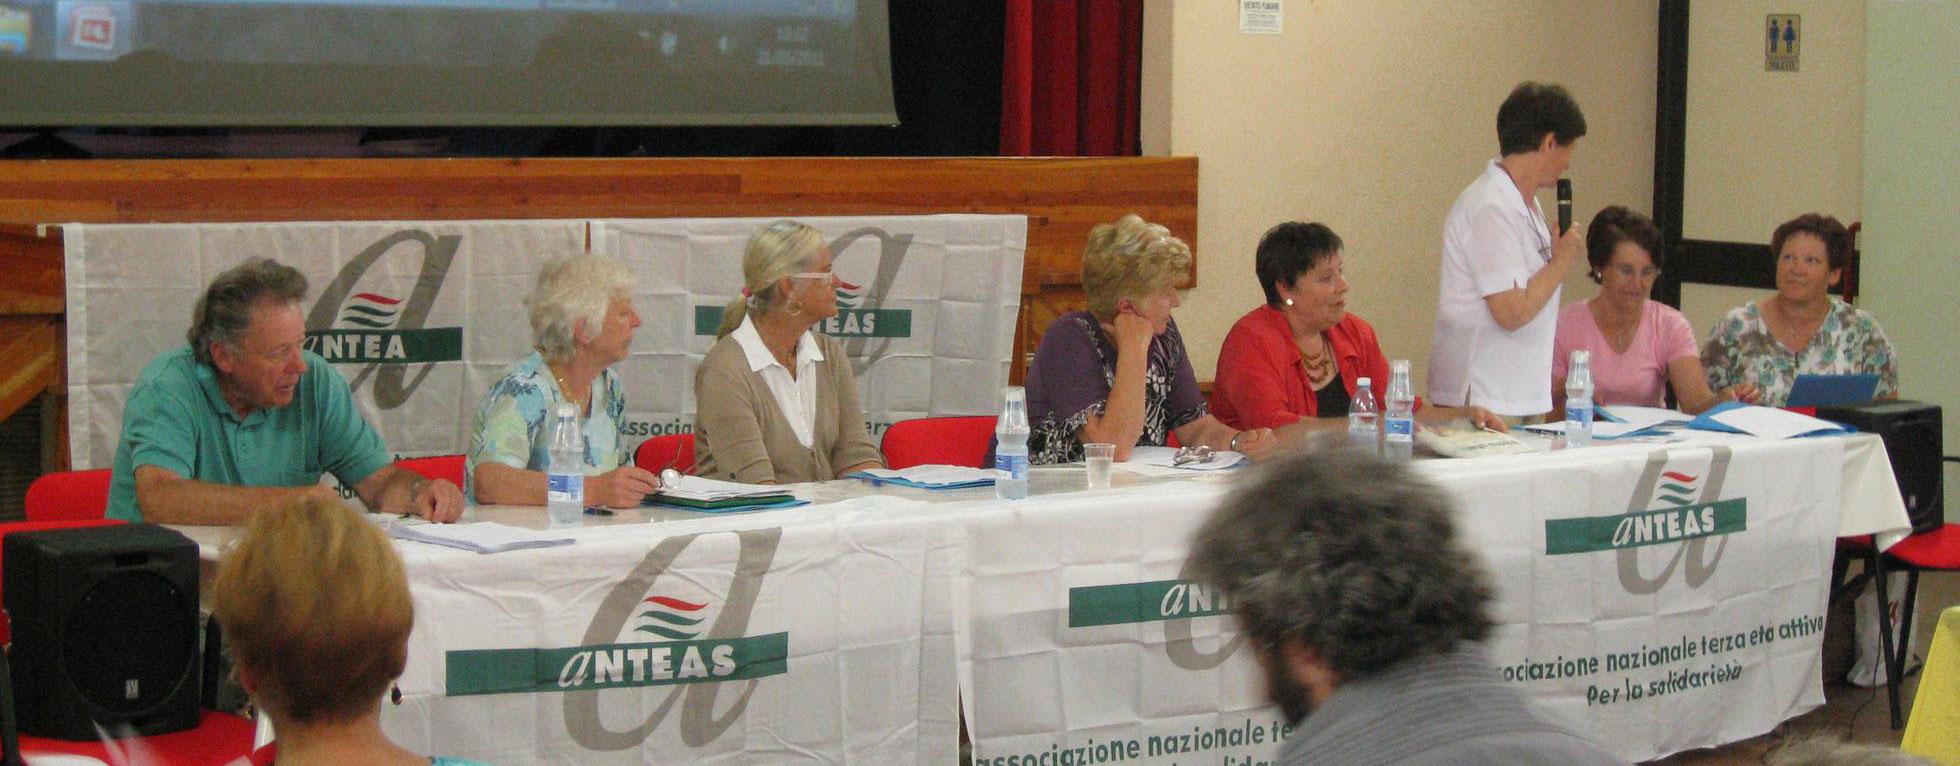 
Conference organized by Anteas Friuli